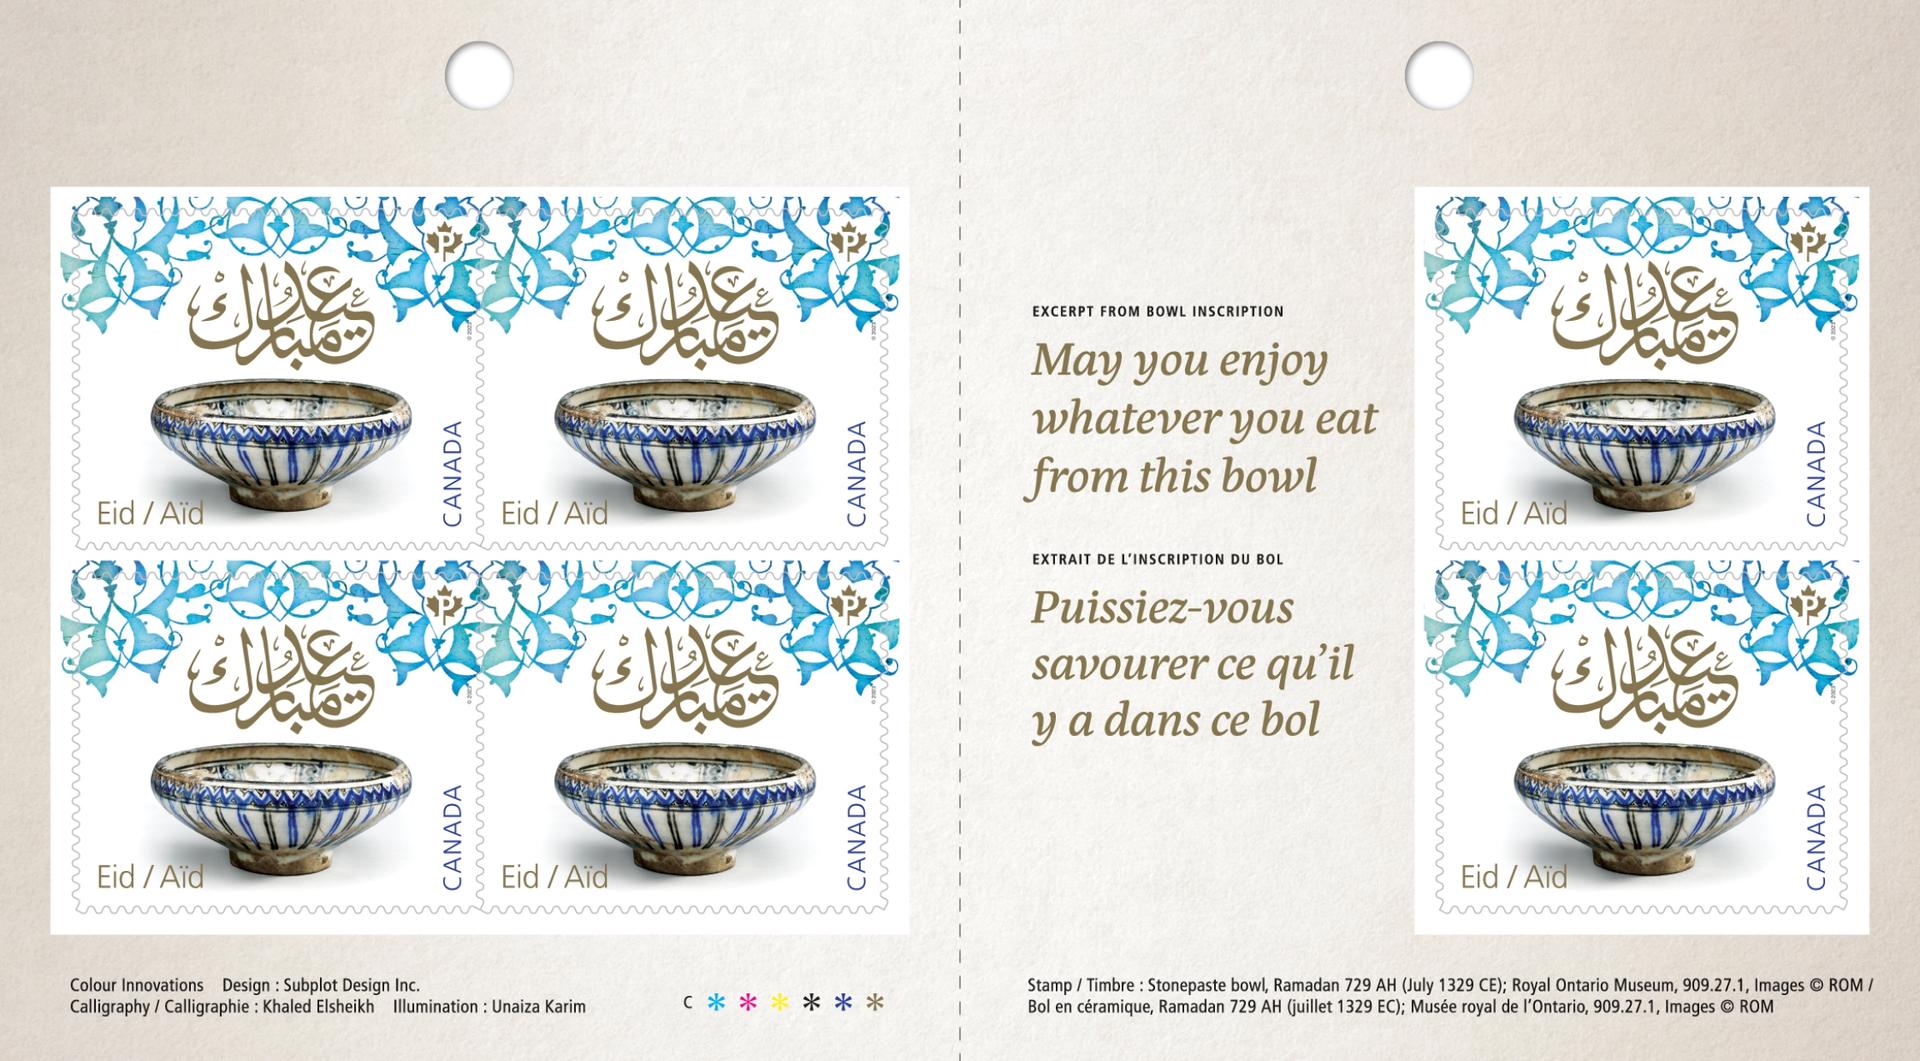 The Eid stamp released by Canada Post this year features a medieval bowl with geometric patters, flowers and Persian poetry.